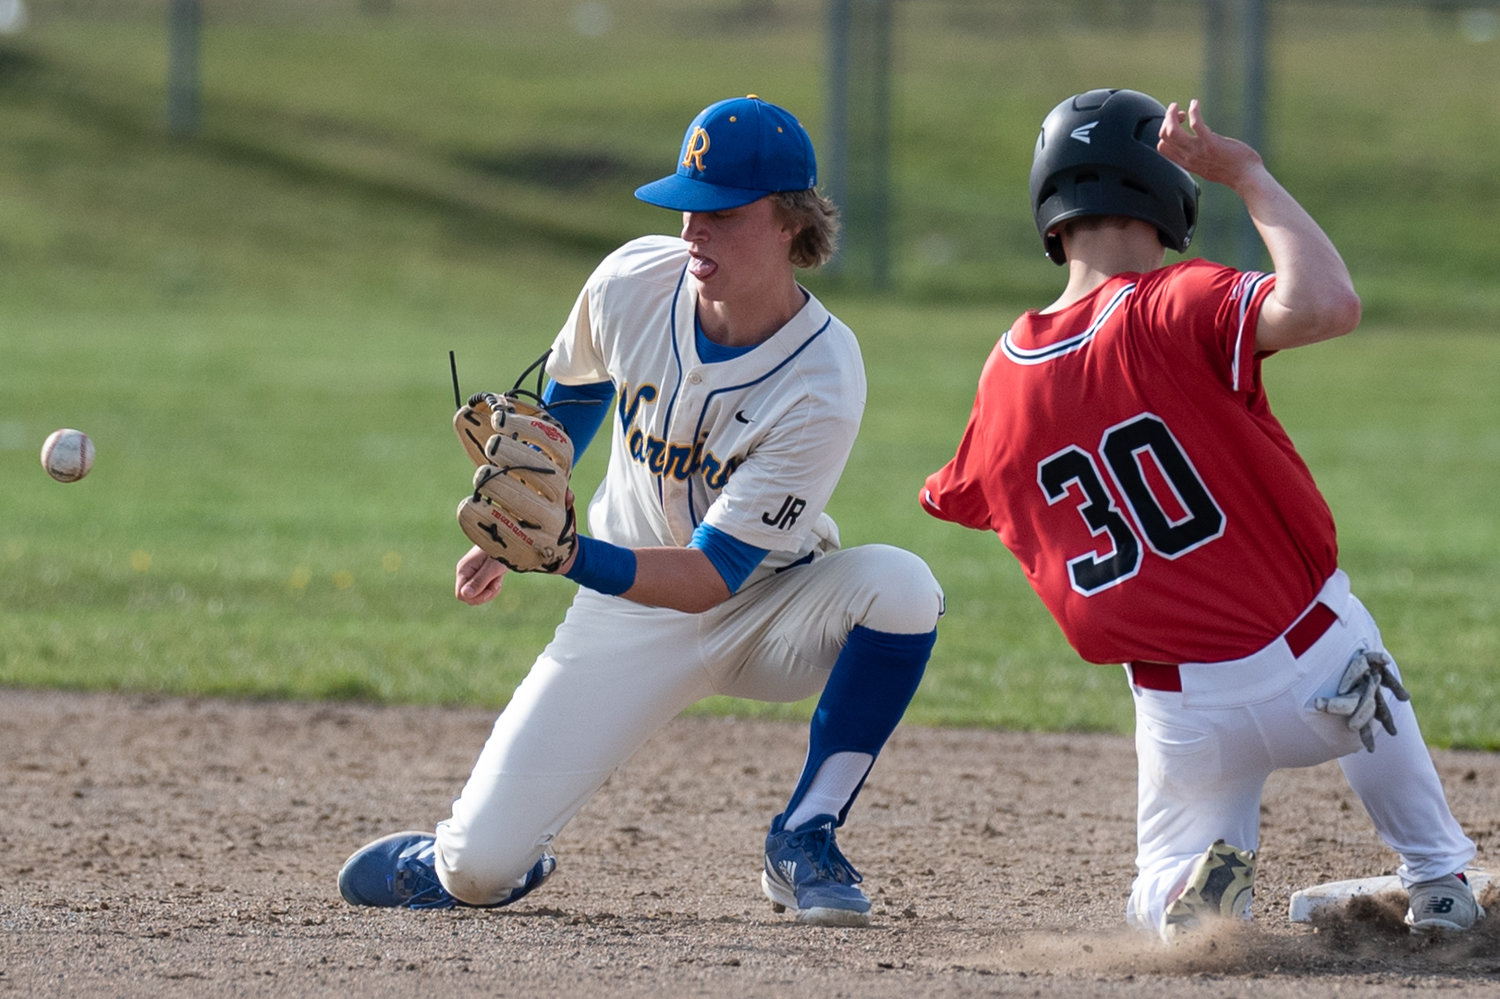 Shelton's Austin Williams reaches base just before the throw from the catcher reaches Rochester's Landon Hawes April 7.